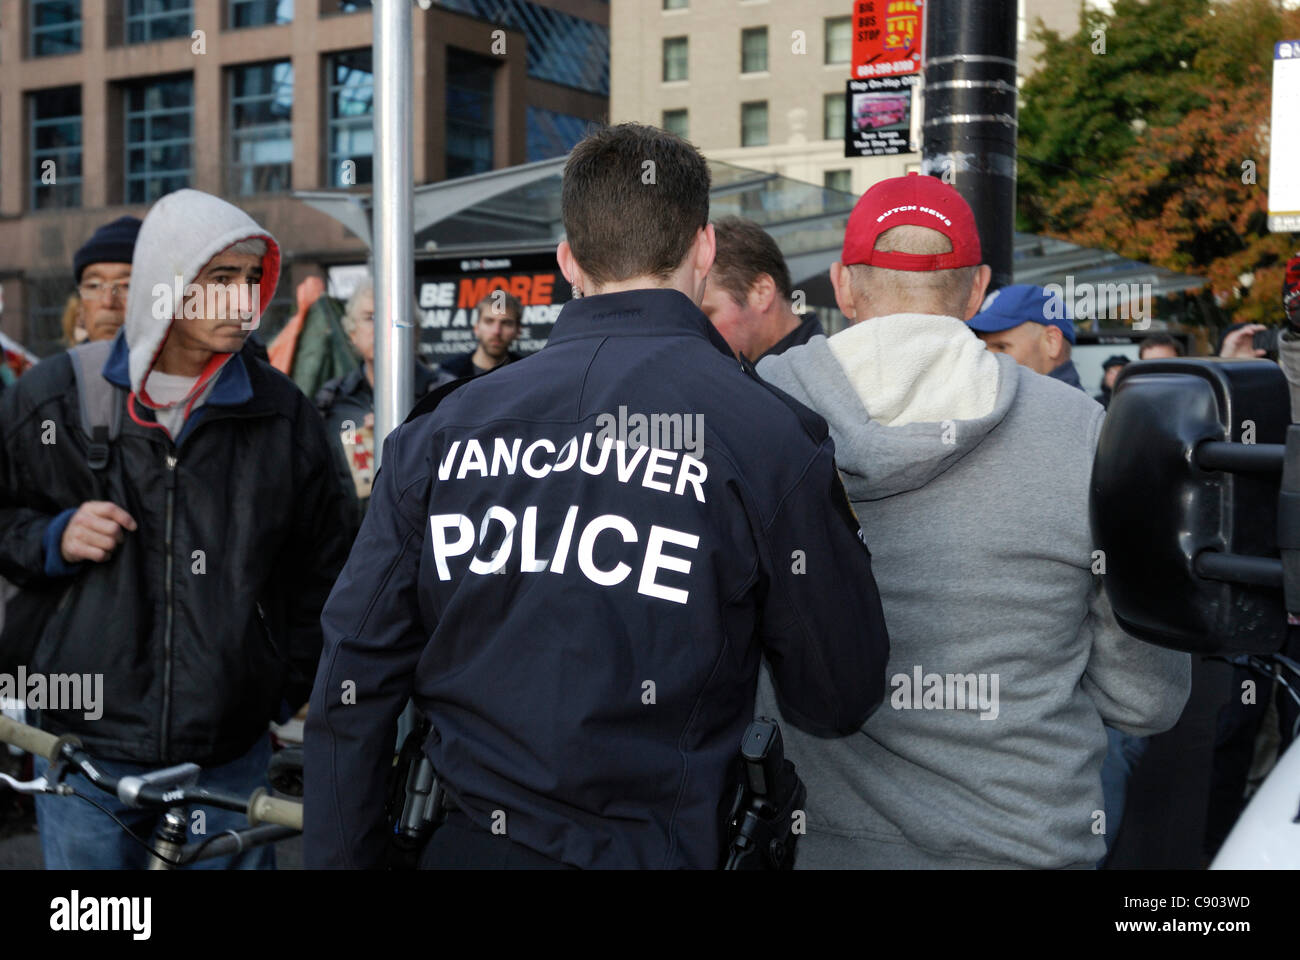 Police remove one of the photographers after getting into a scuffle with a protester from 'Occupy Vancouver'. Vancouver November 5 2011 Stock Photo